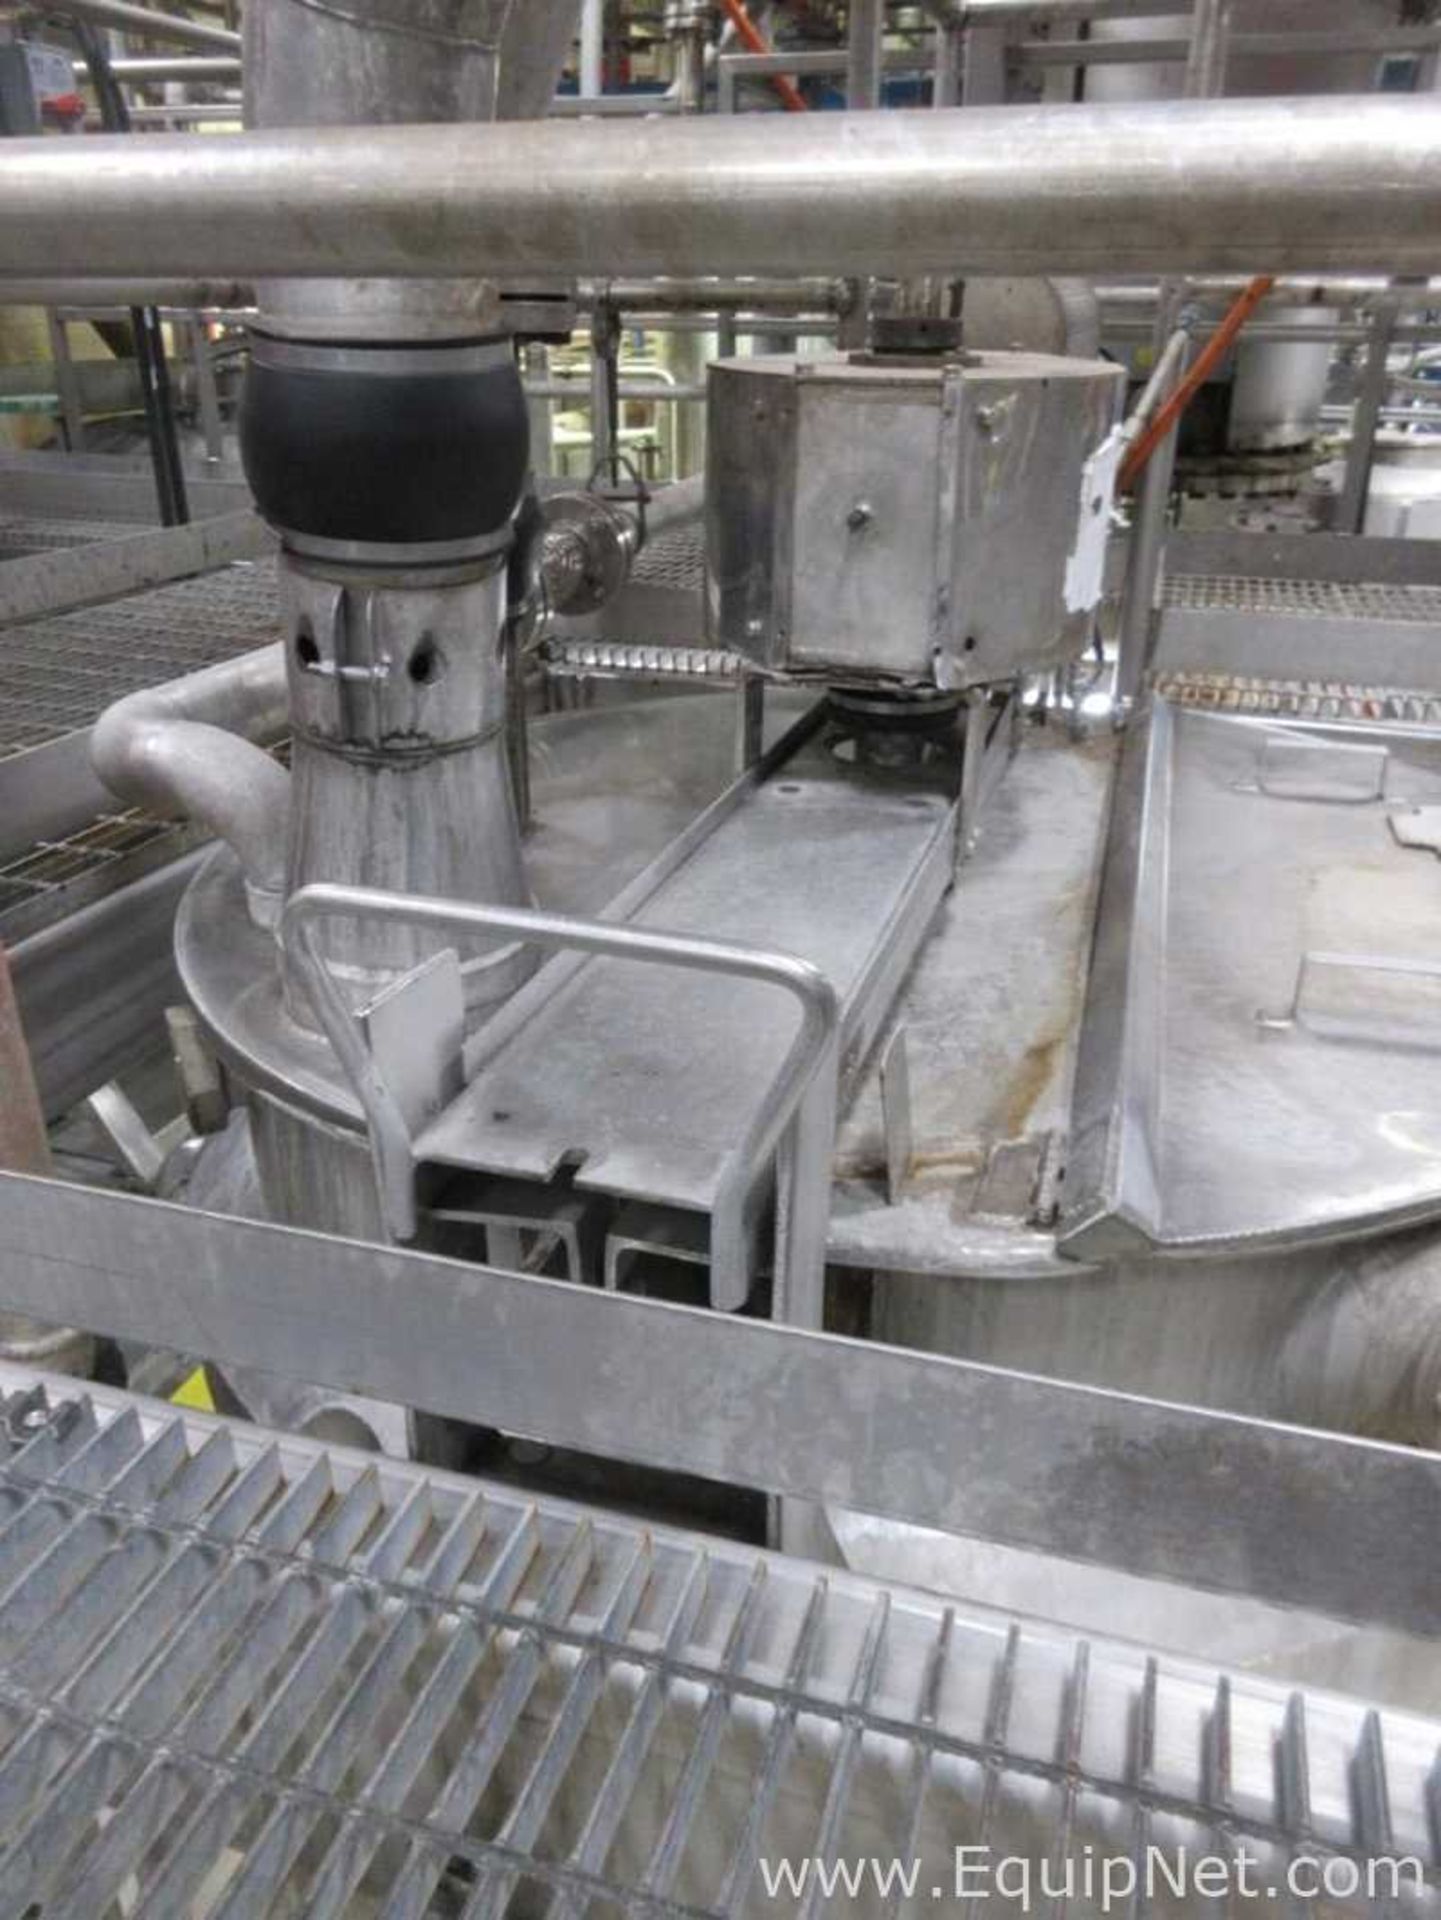 Lee Stainless Steel Double Motion Kettle With Progressive Cavity Pump - Image 5 of 14